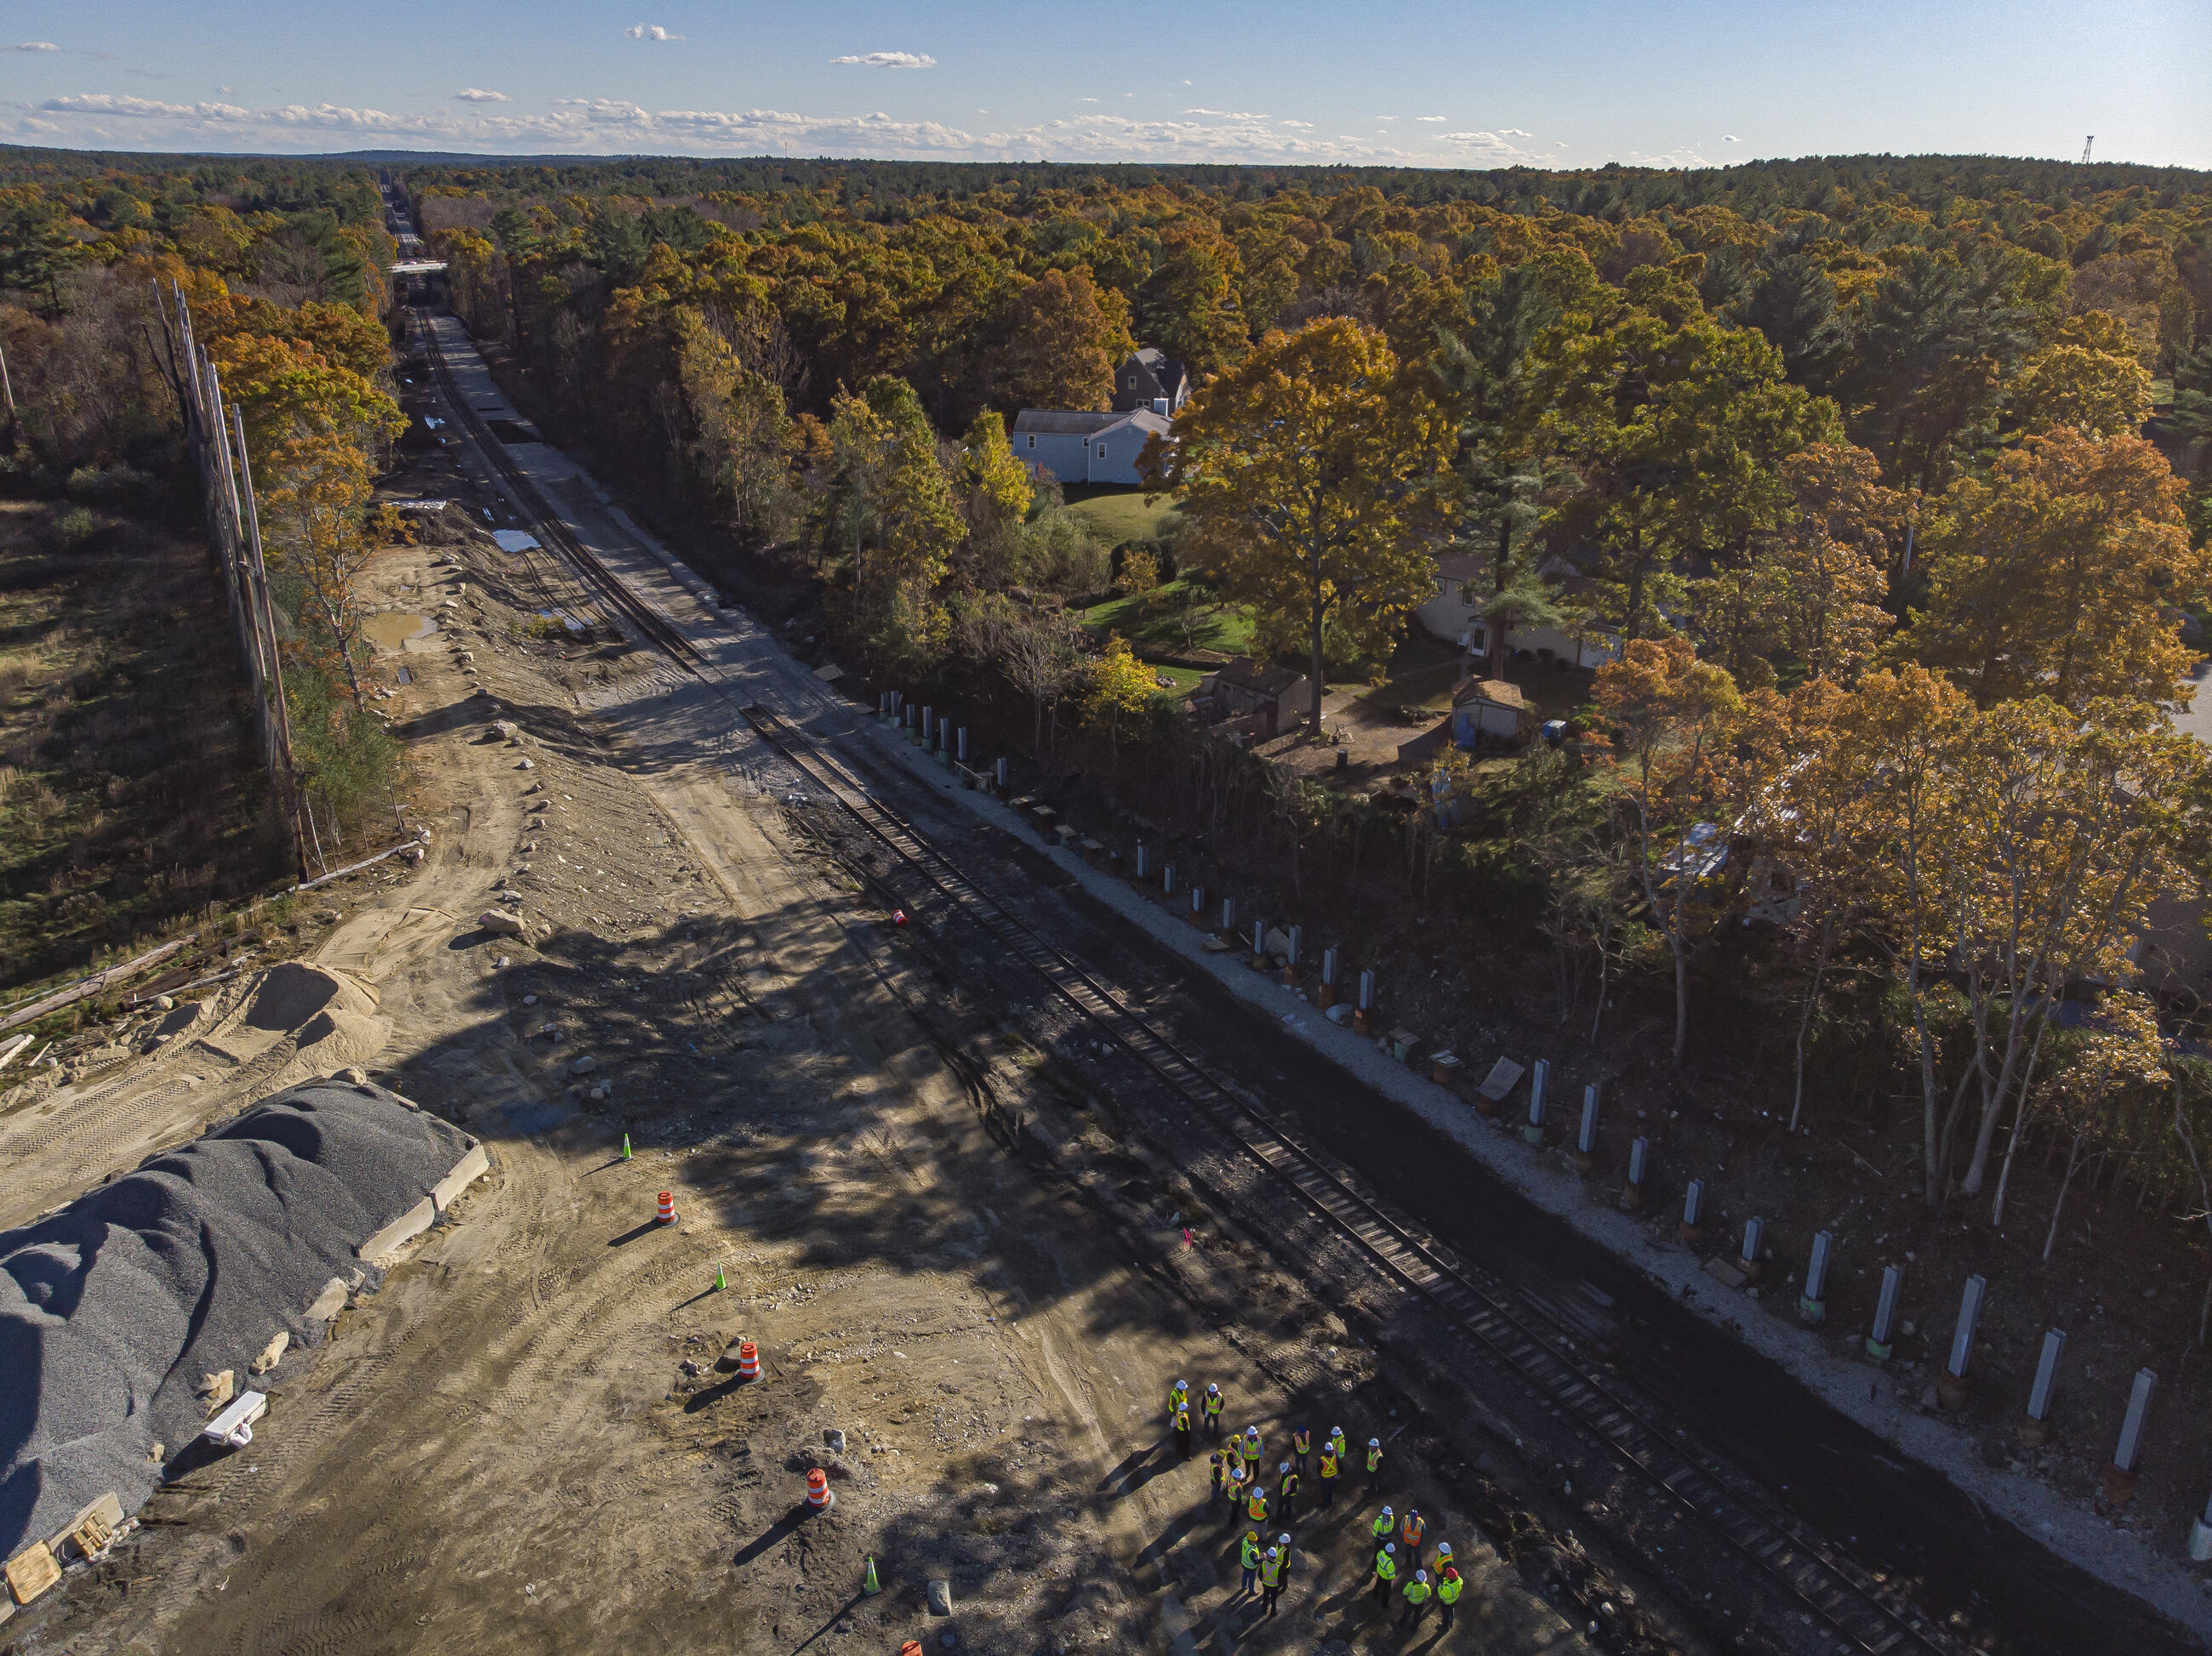 An aerial photo of rail tracks in the forest, showing Taunton Depot under construction